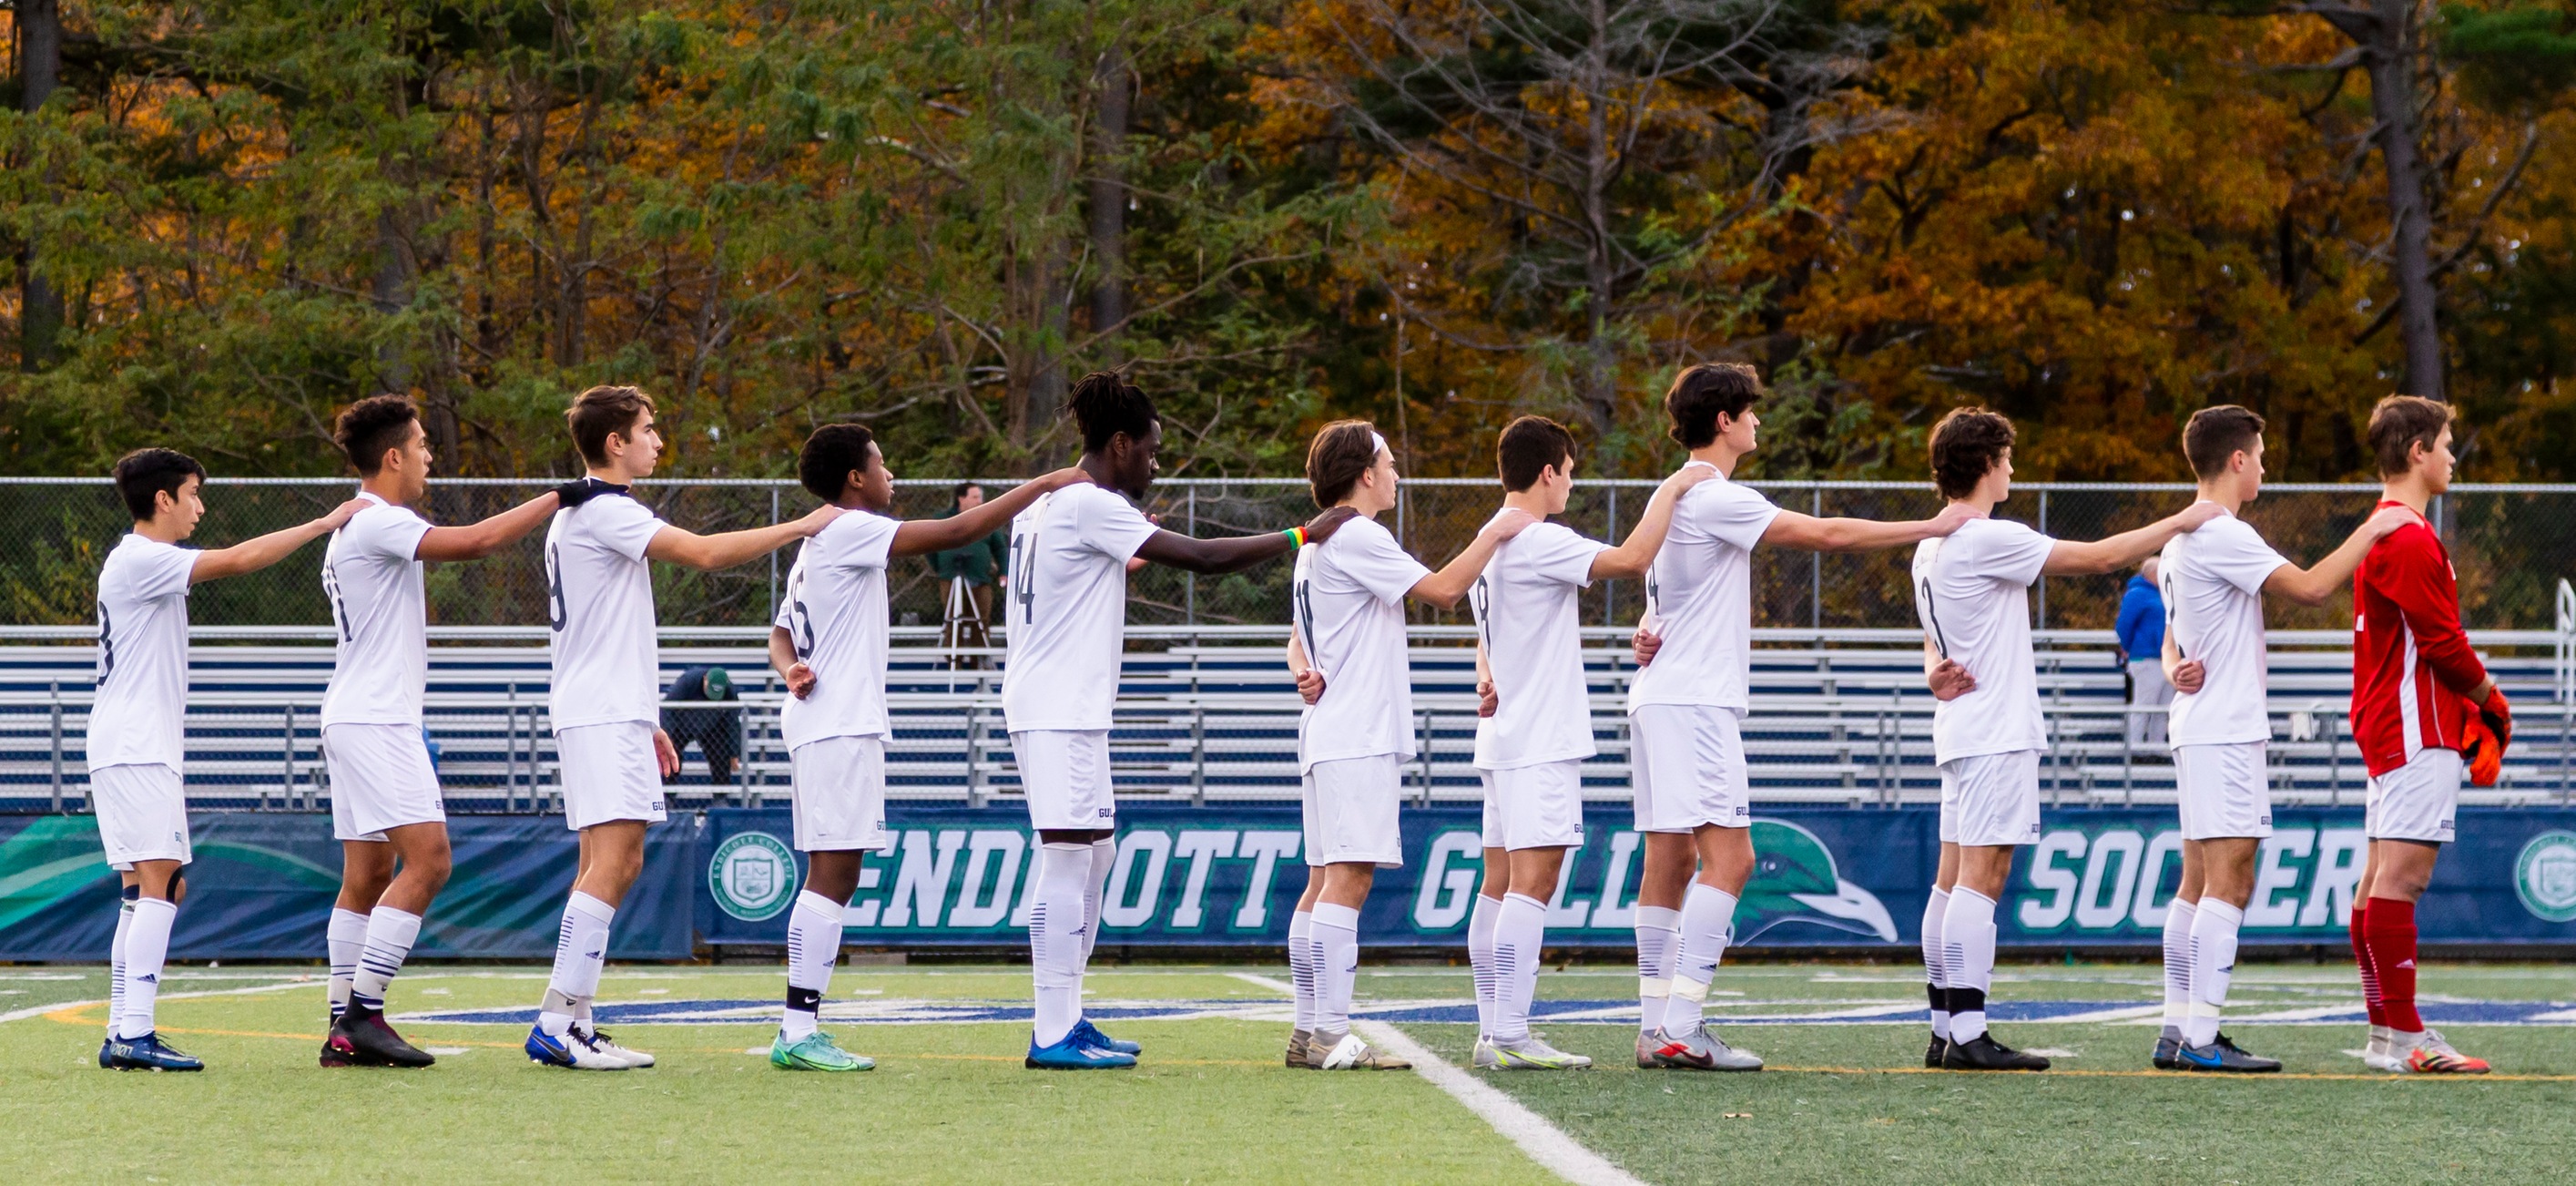 CCC SEMIFINALS: Men's Soccer Edged By Gordon, 3-2